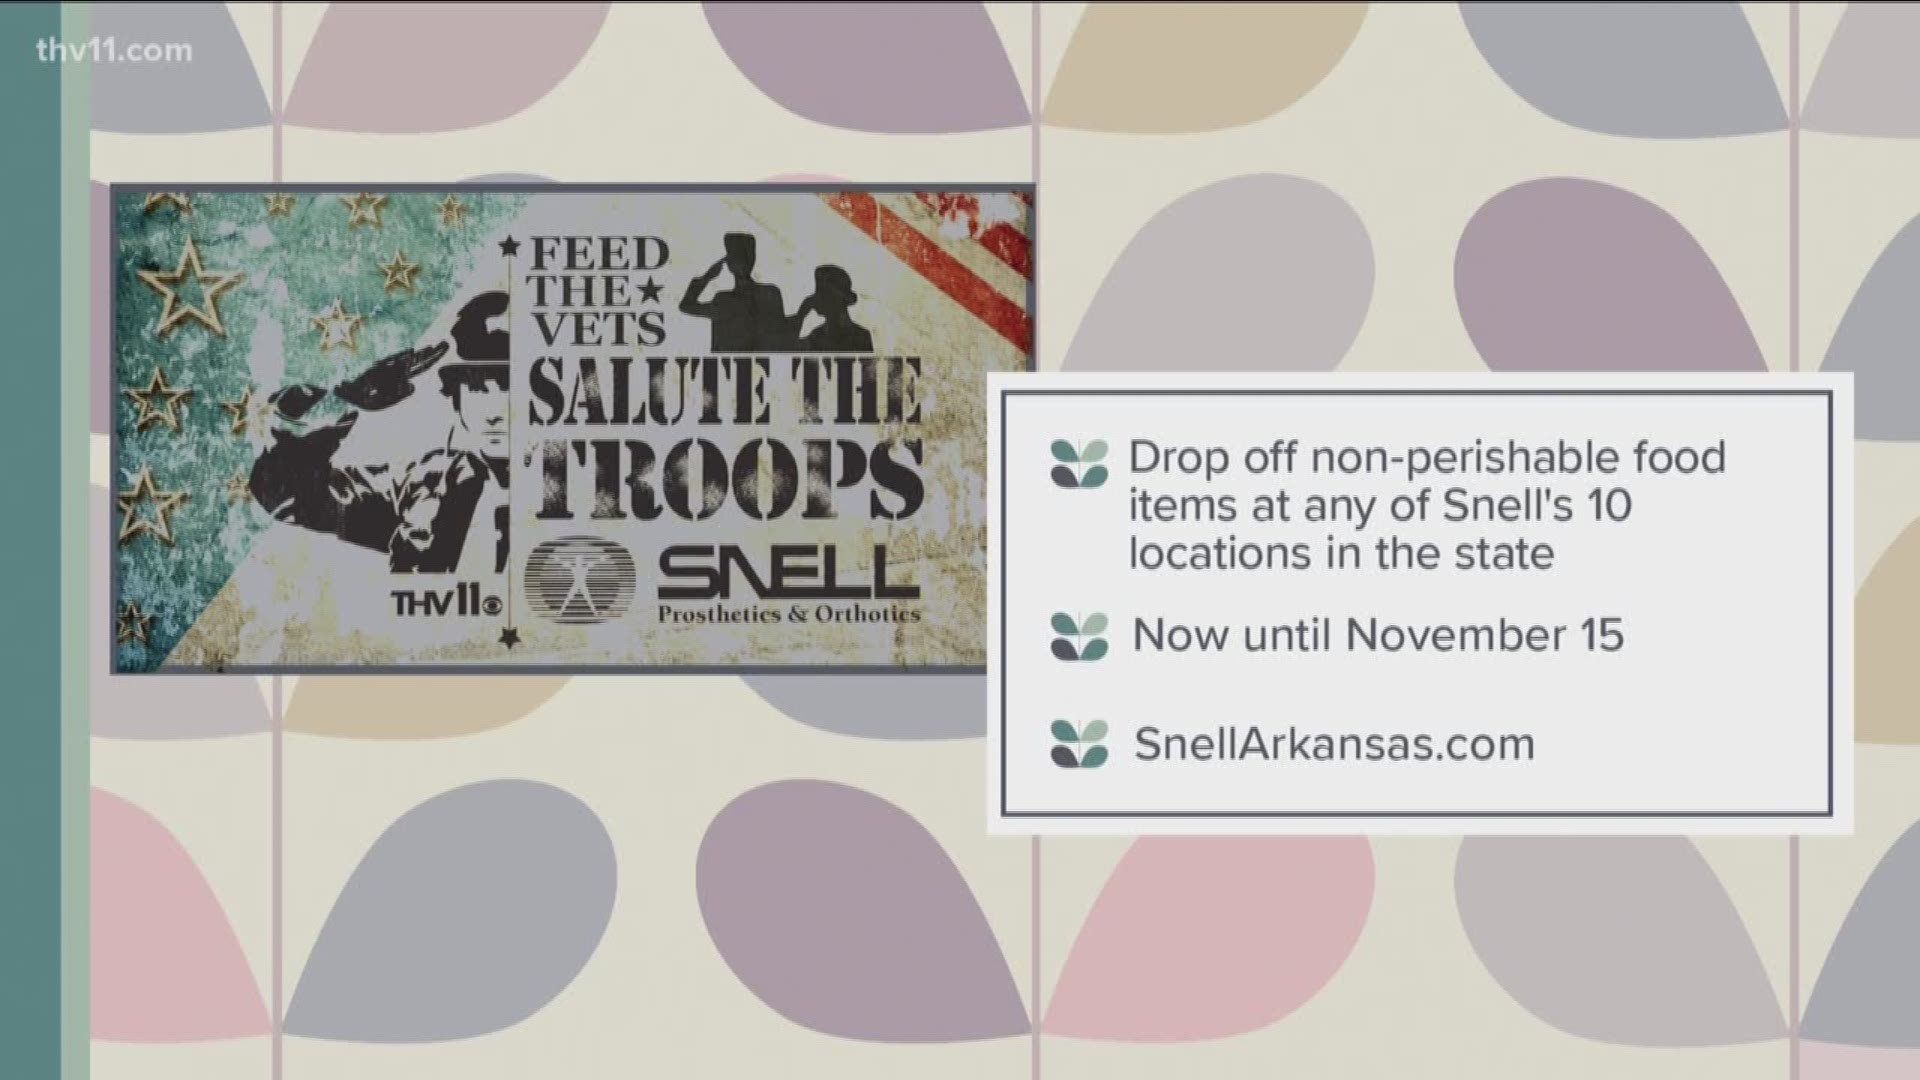 It's been more than a month since THV11 and Snell Prosthetics & Orthotics launched our 'Feed the Vets. Salute the Troops' food drive.